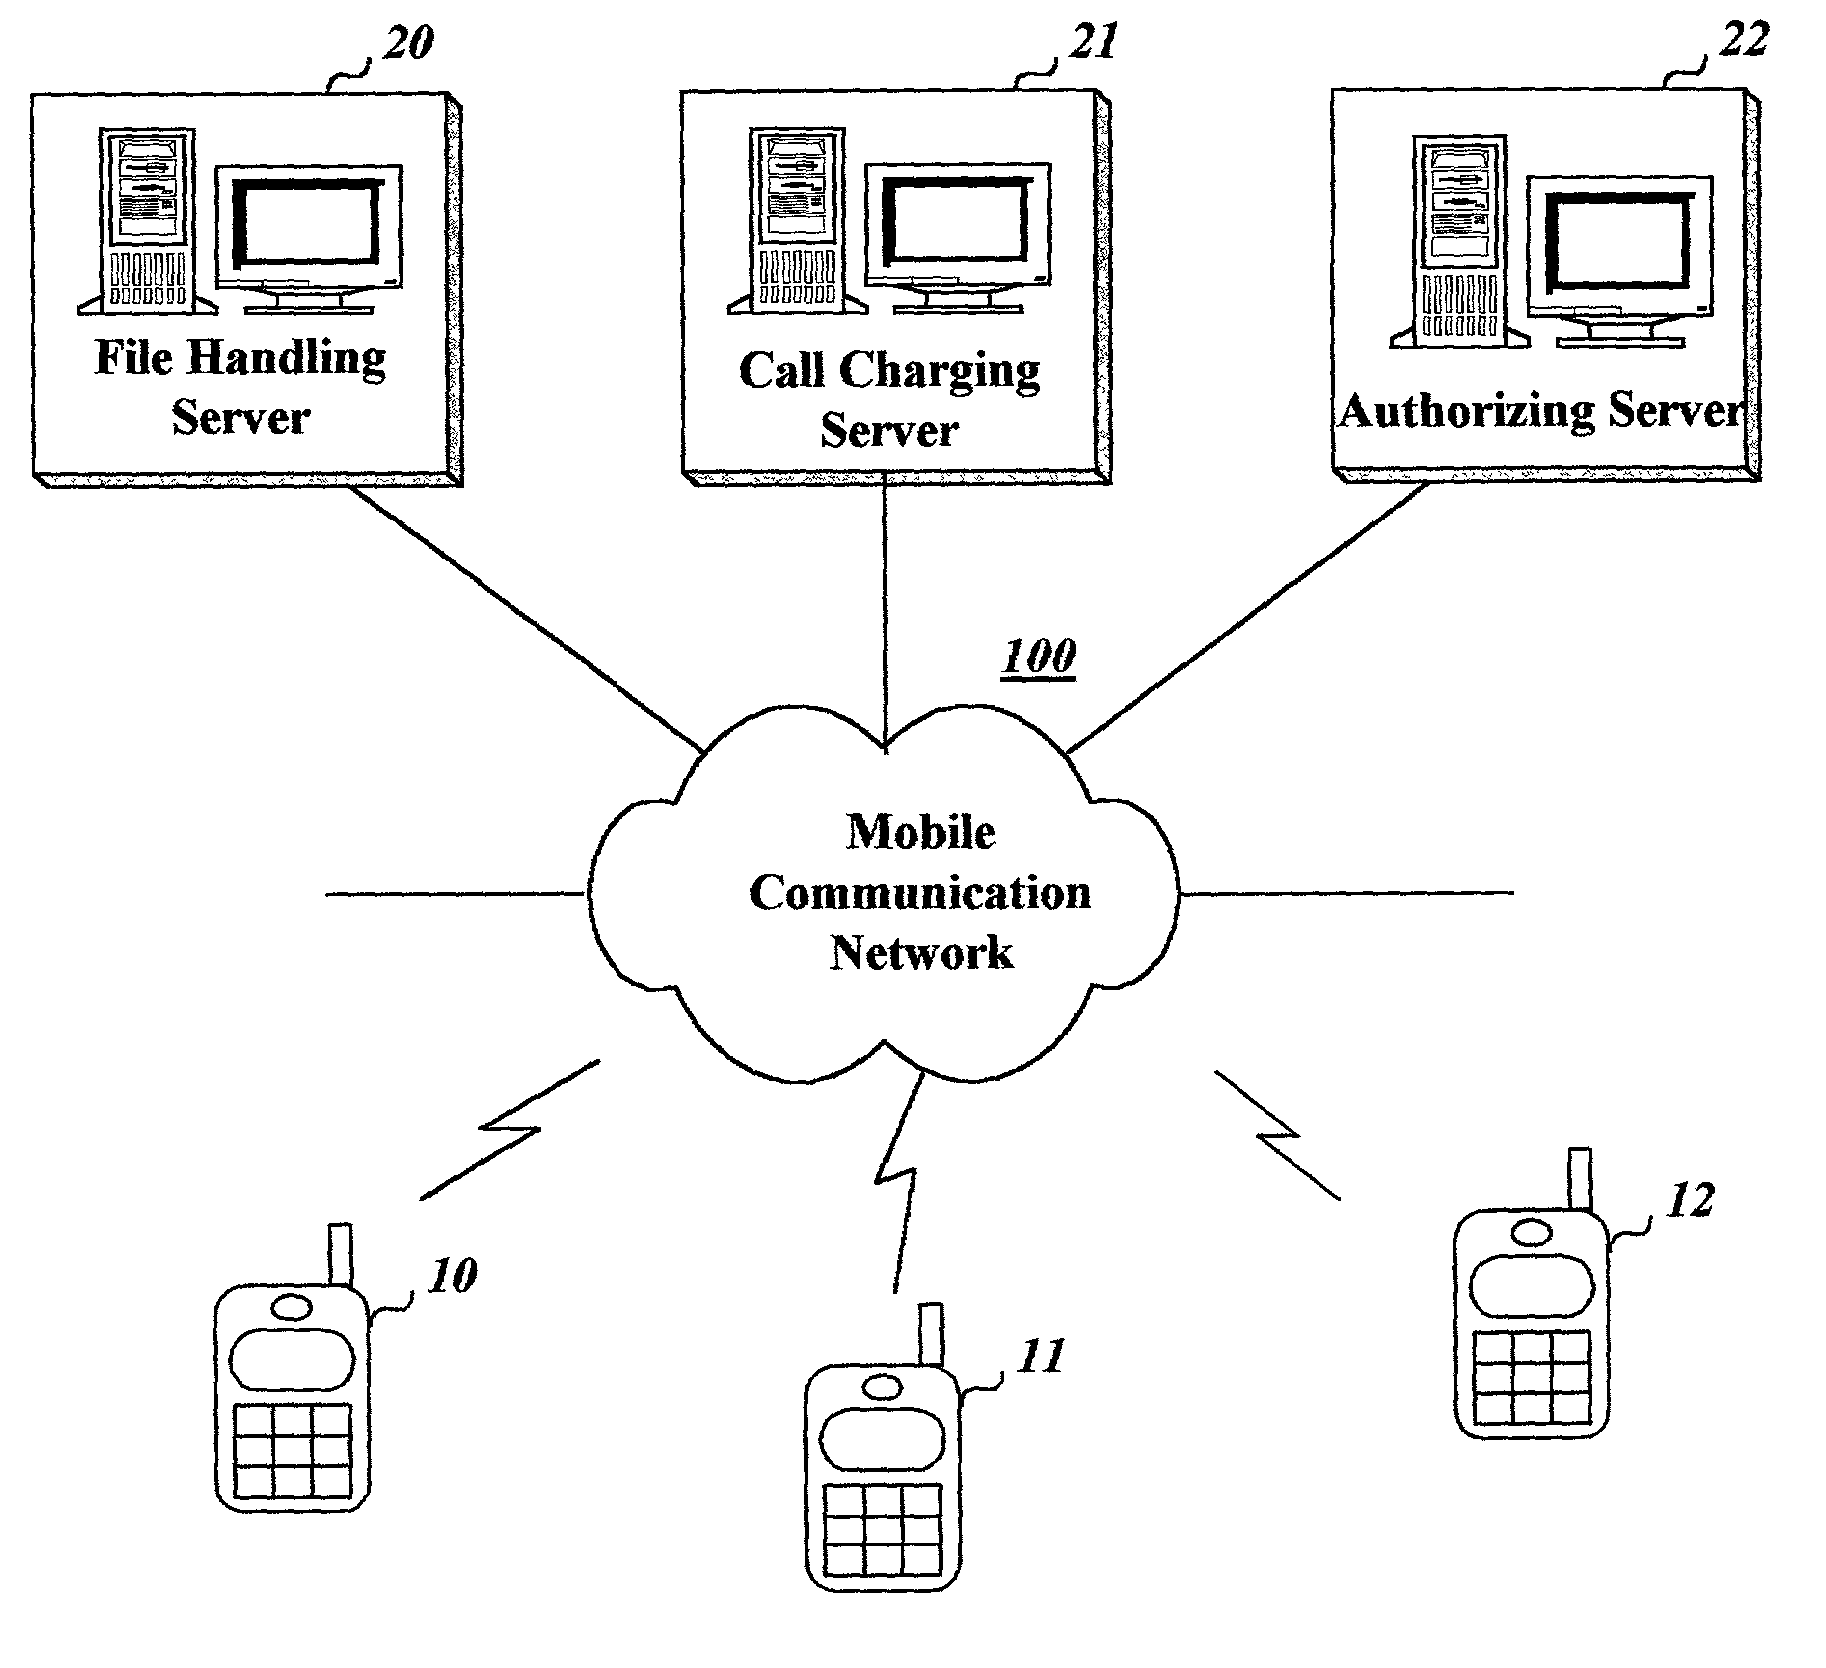 Method of providing a file transfer service through a mobile communication network